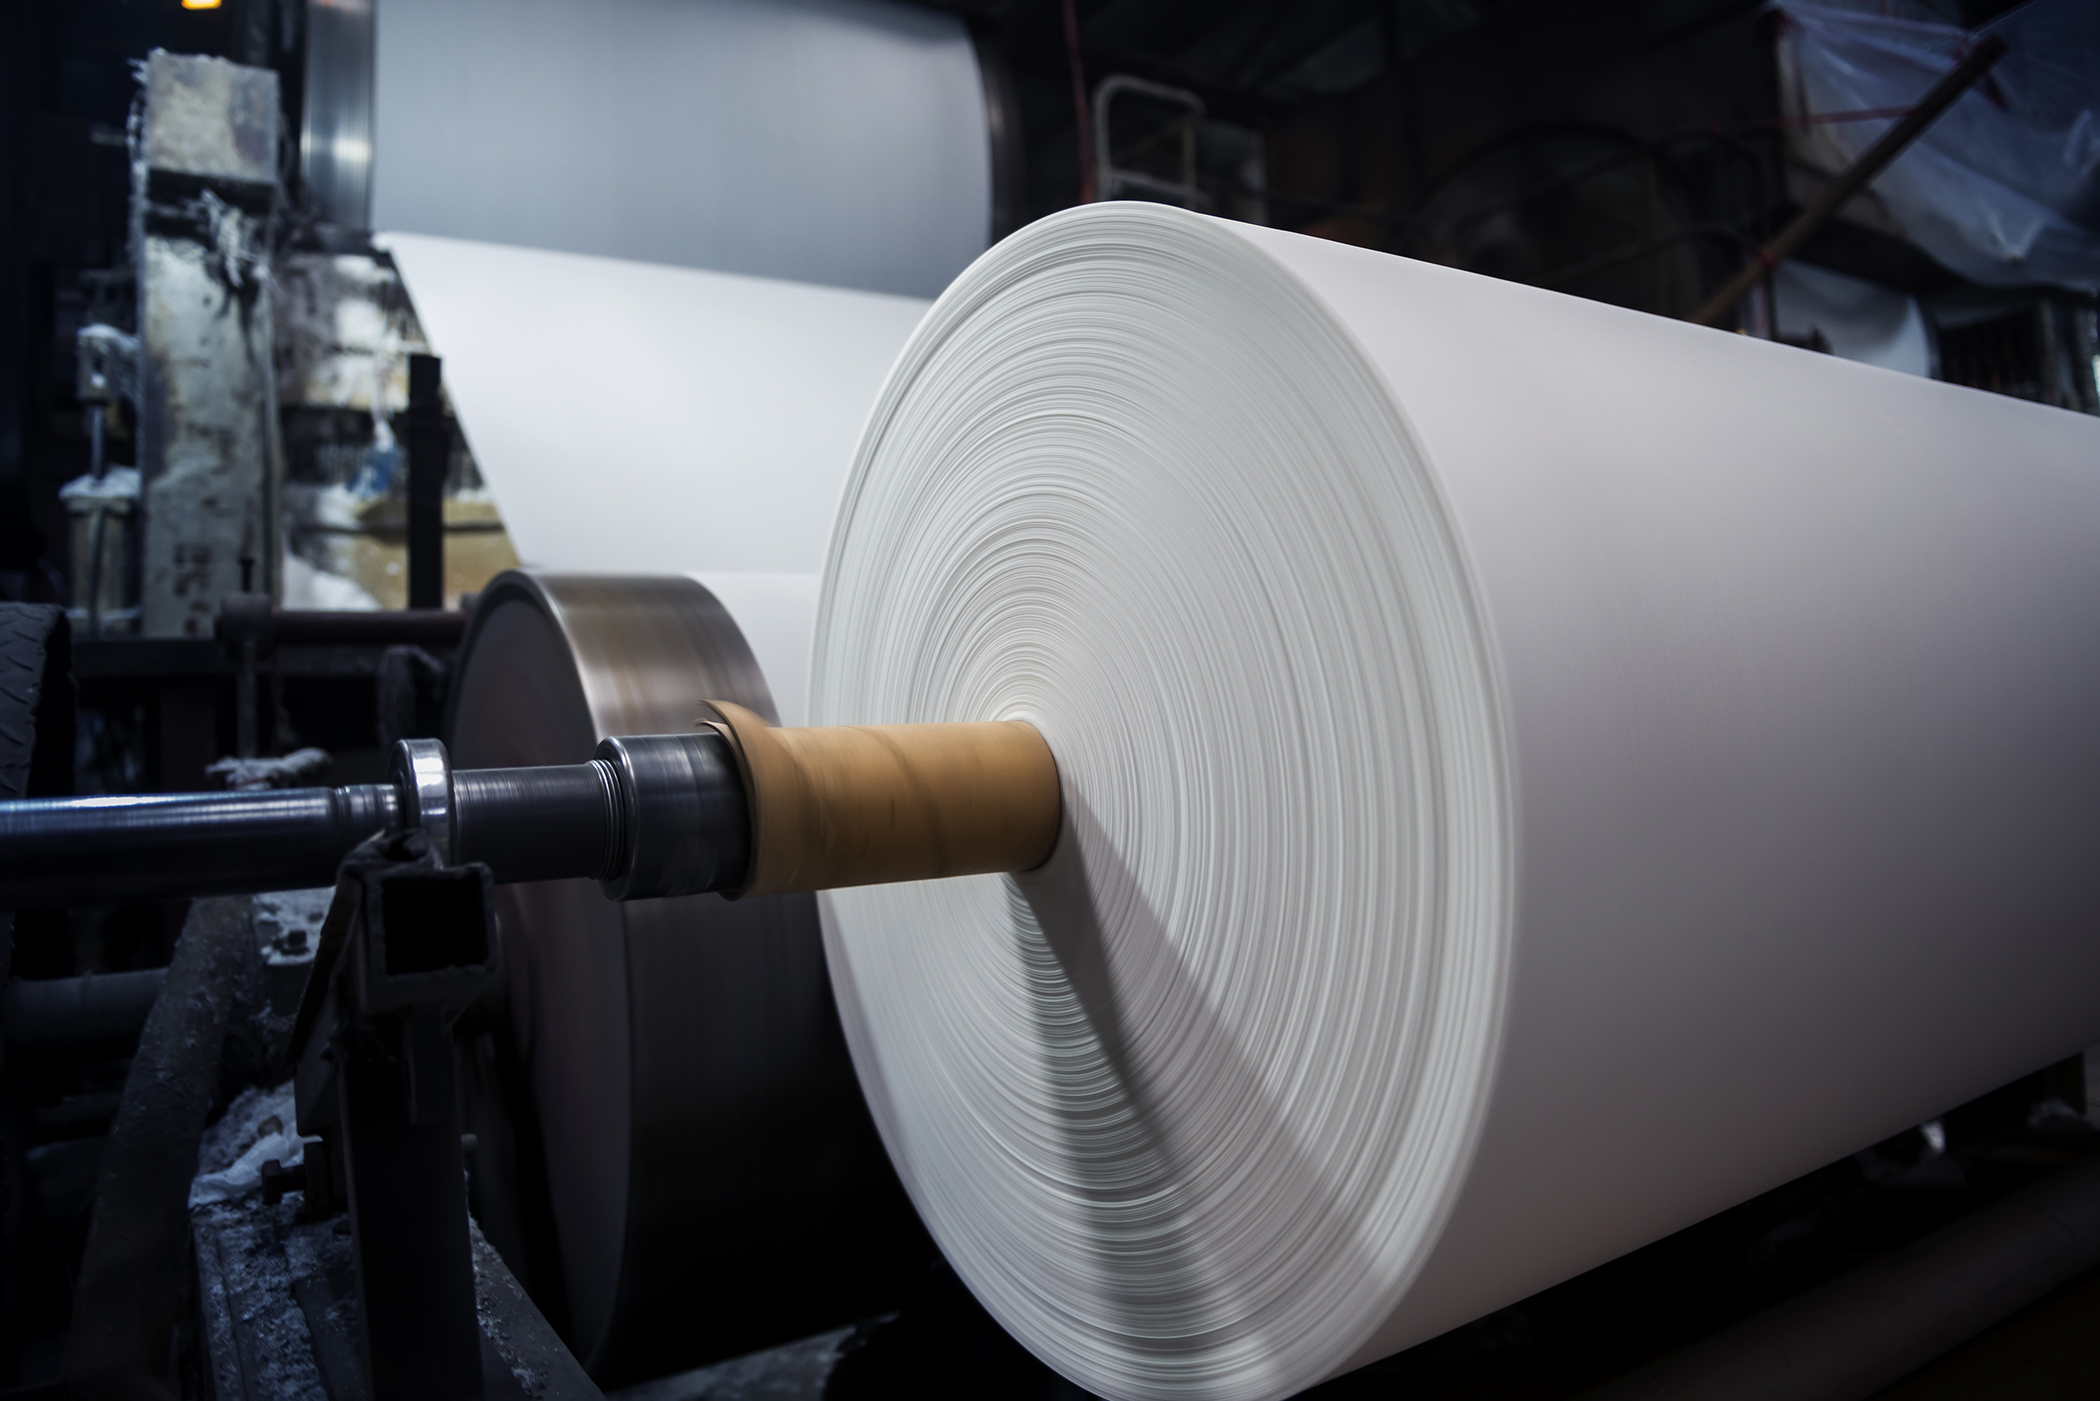 One global manufacturer of pulp and paper products turned to Tsubaki to reduce total cost of ownership (TCO) via a premium chain solution.